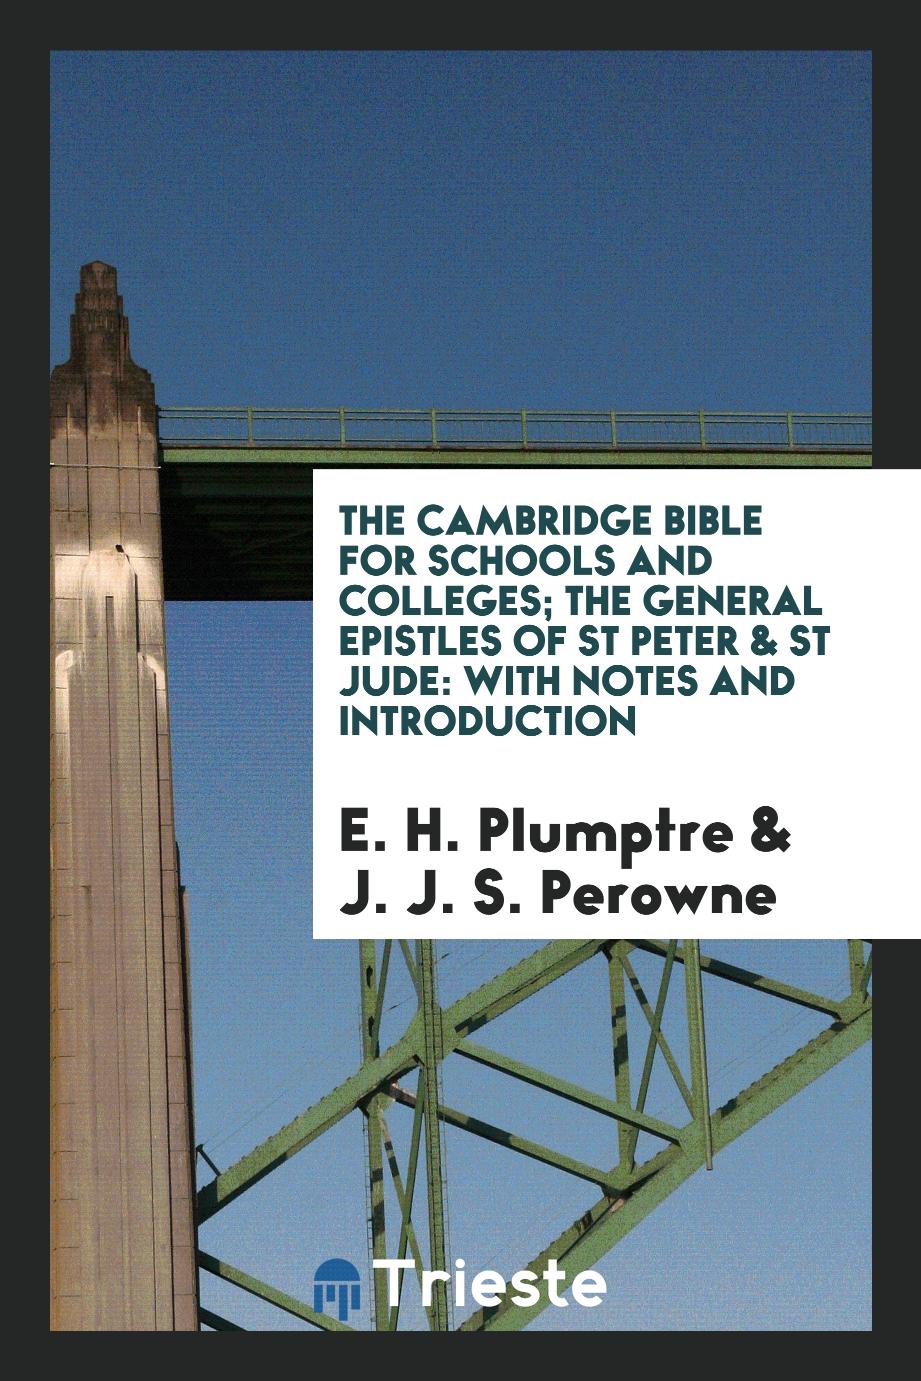 E. H. Plumptre, J. J. S. Perowne - The Cambridge Bible for Schools and Colleges; The General Epistles of St Peter & St Jude: With Notes and Introduction